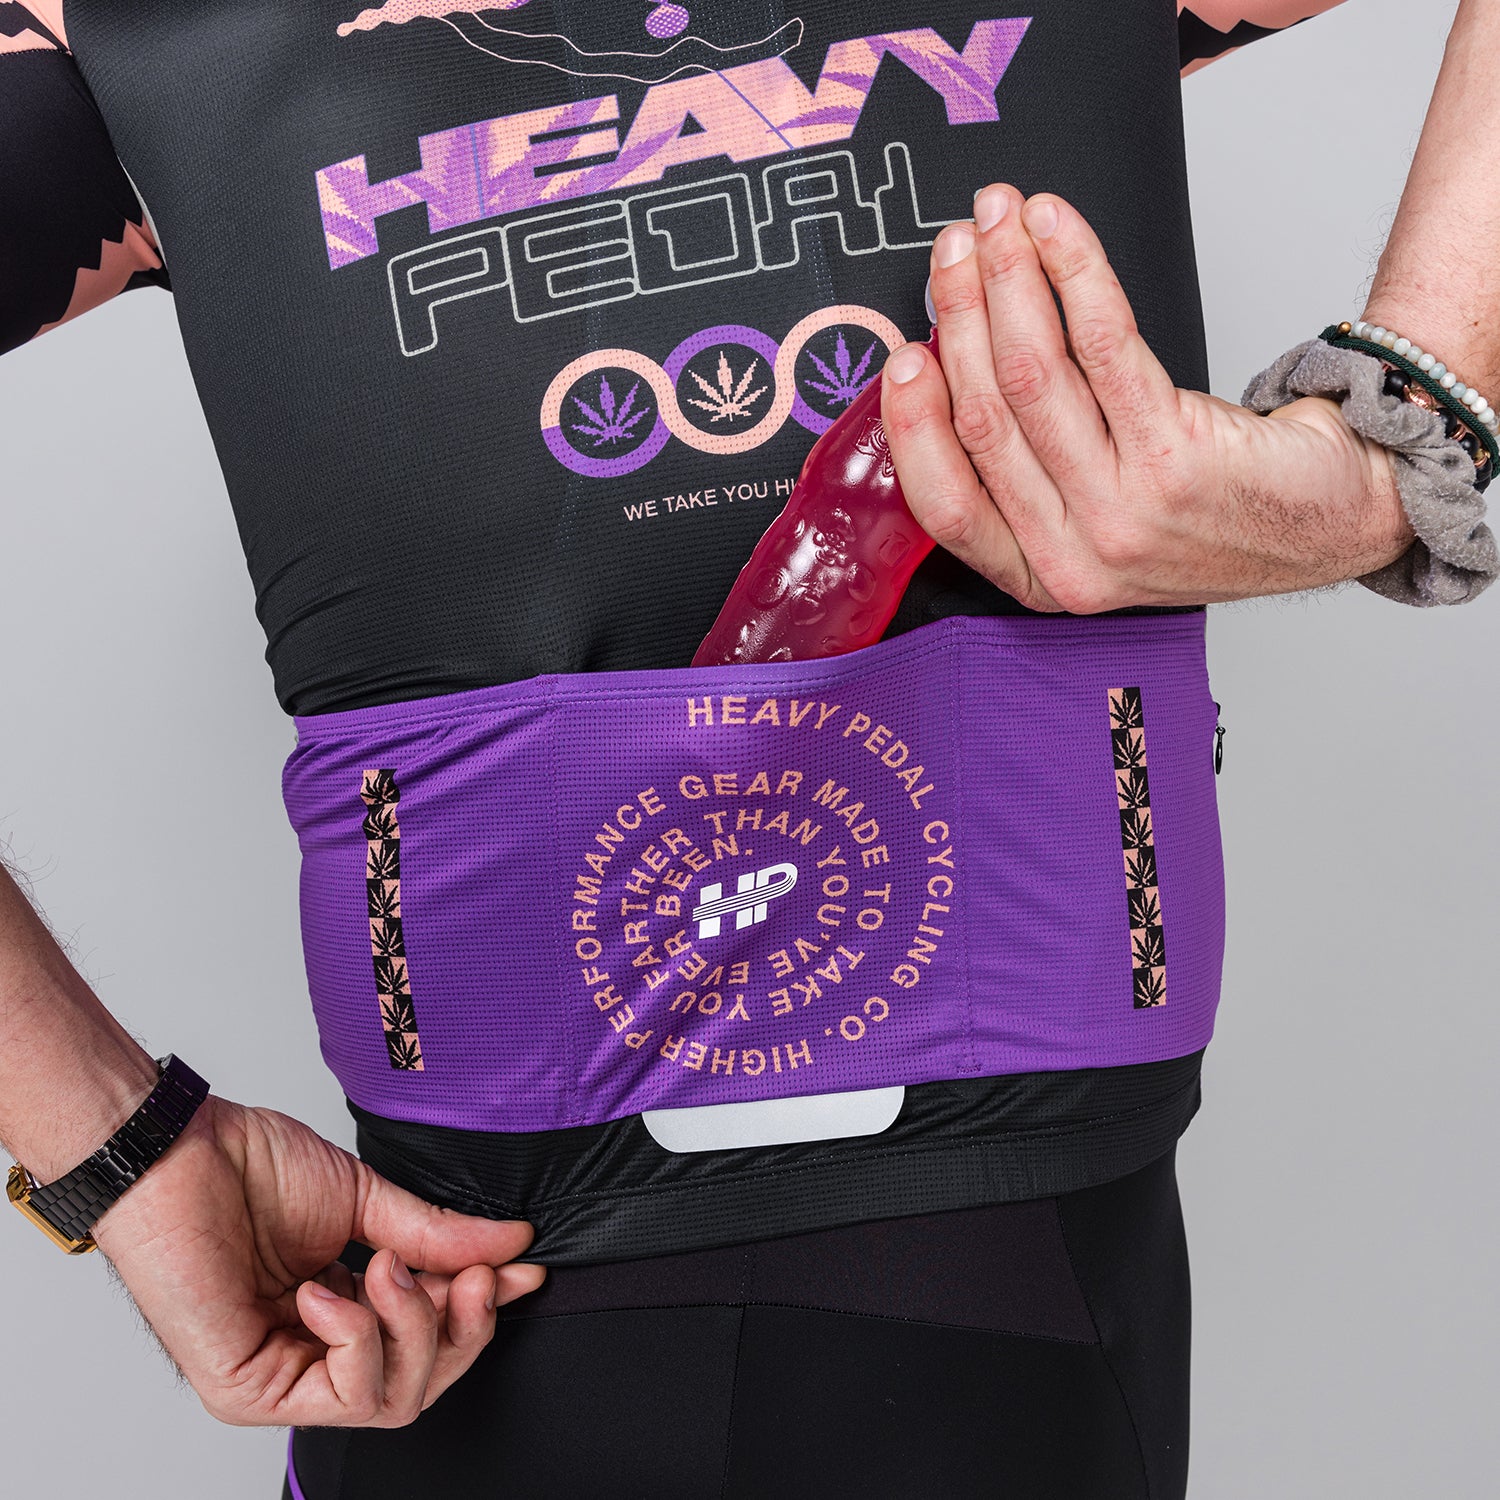 The Heavy Pedal Blossom BLOX Women's Jersey